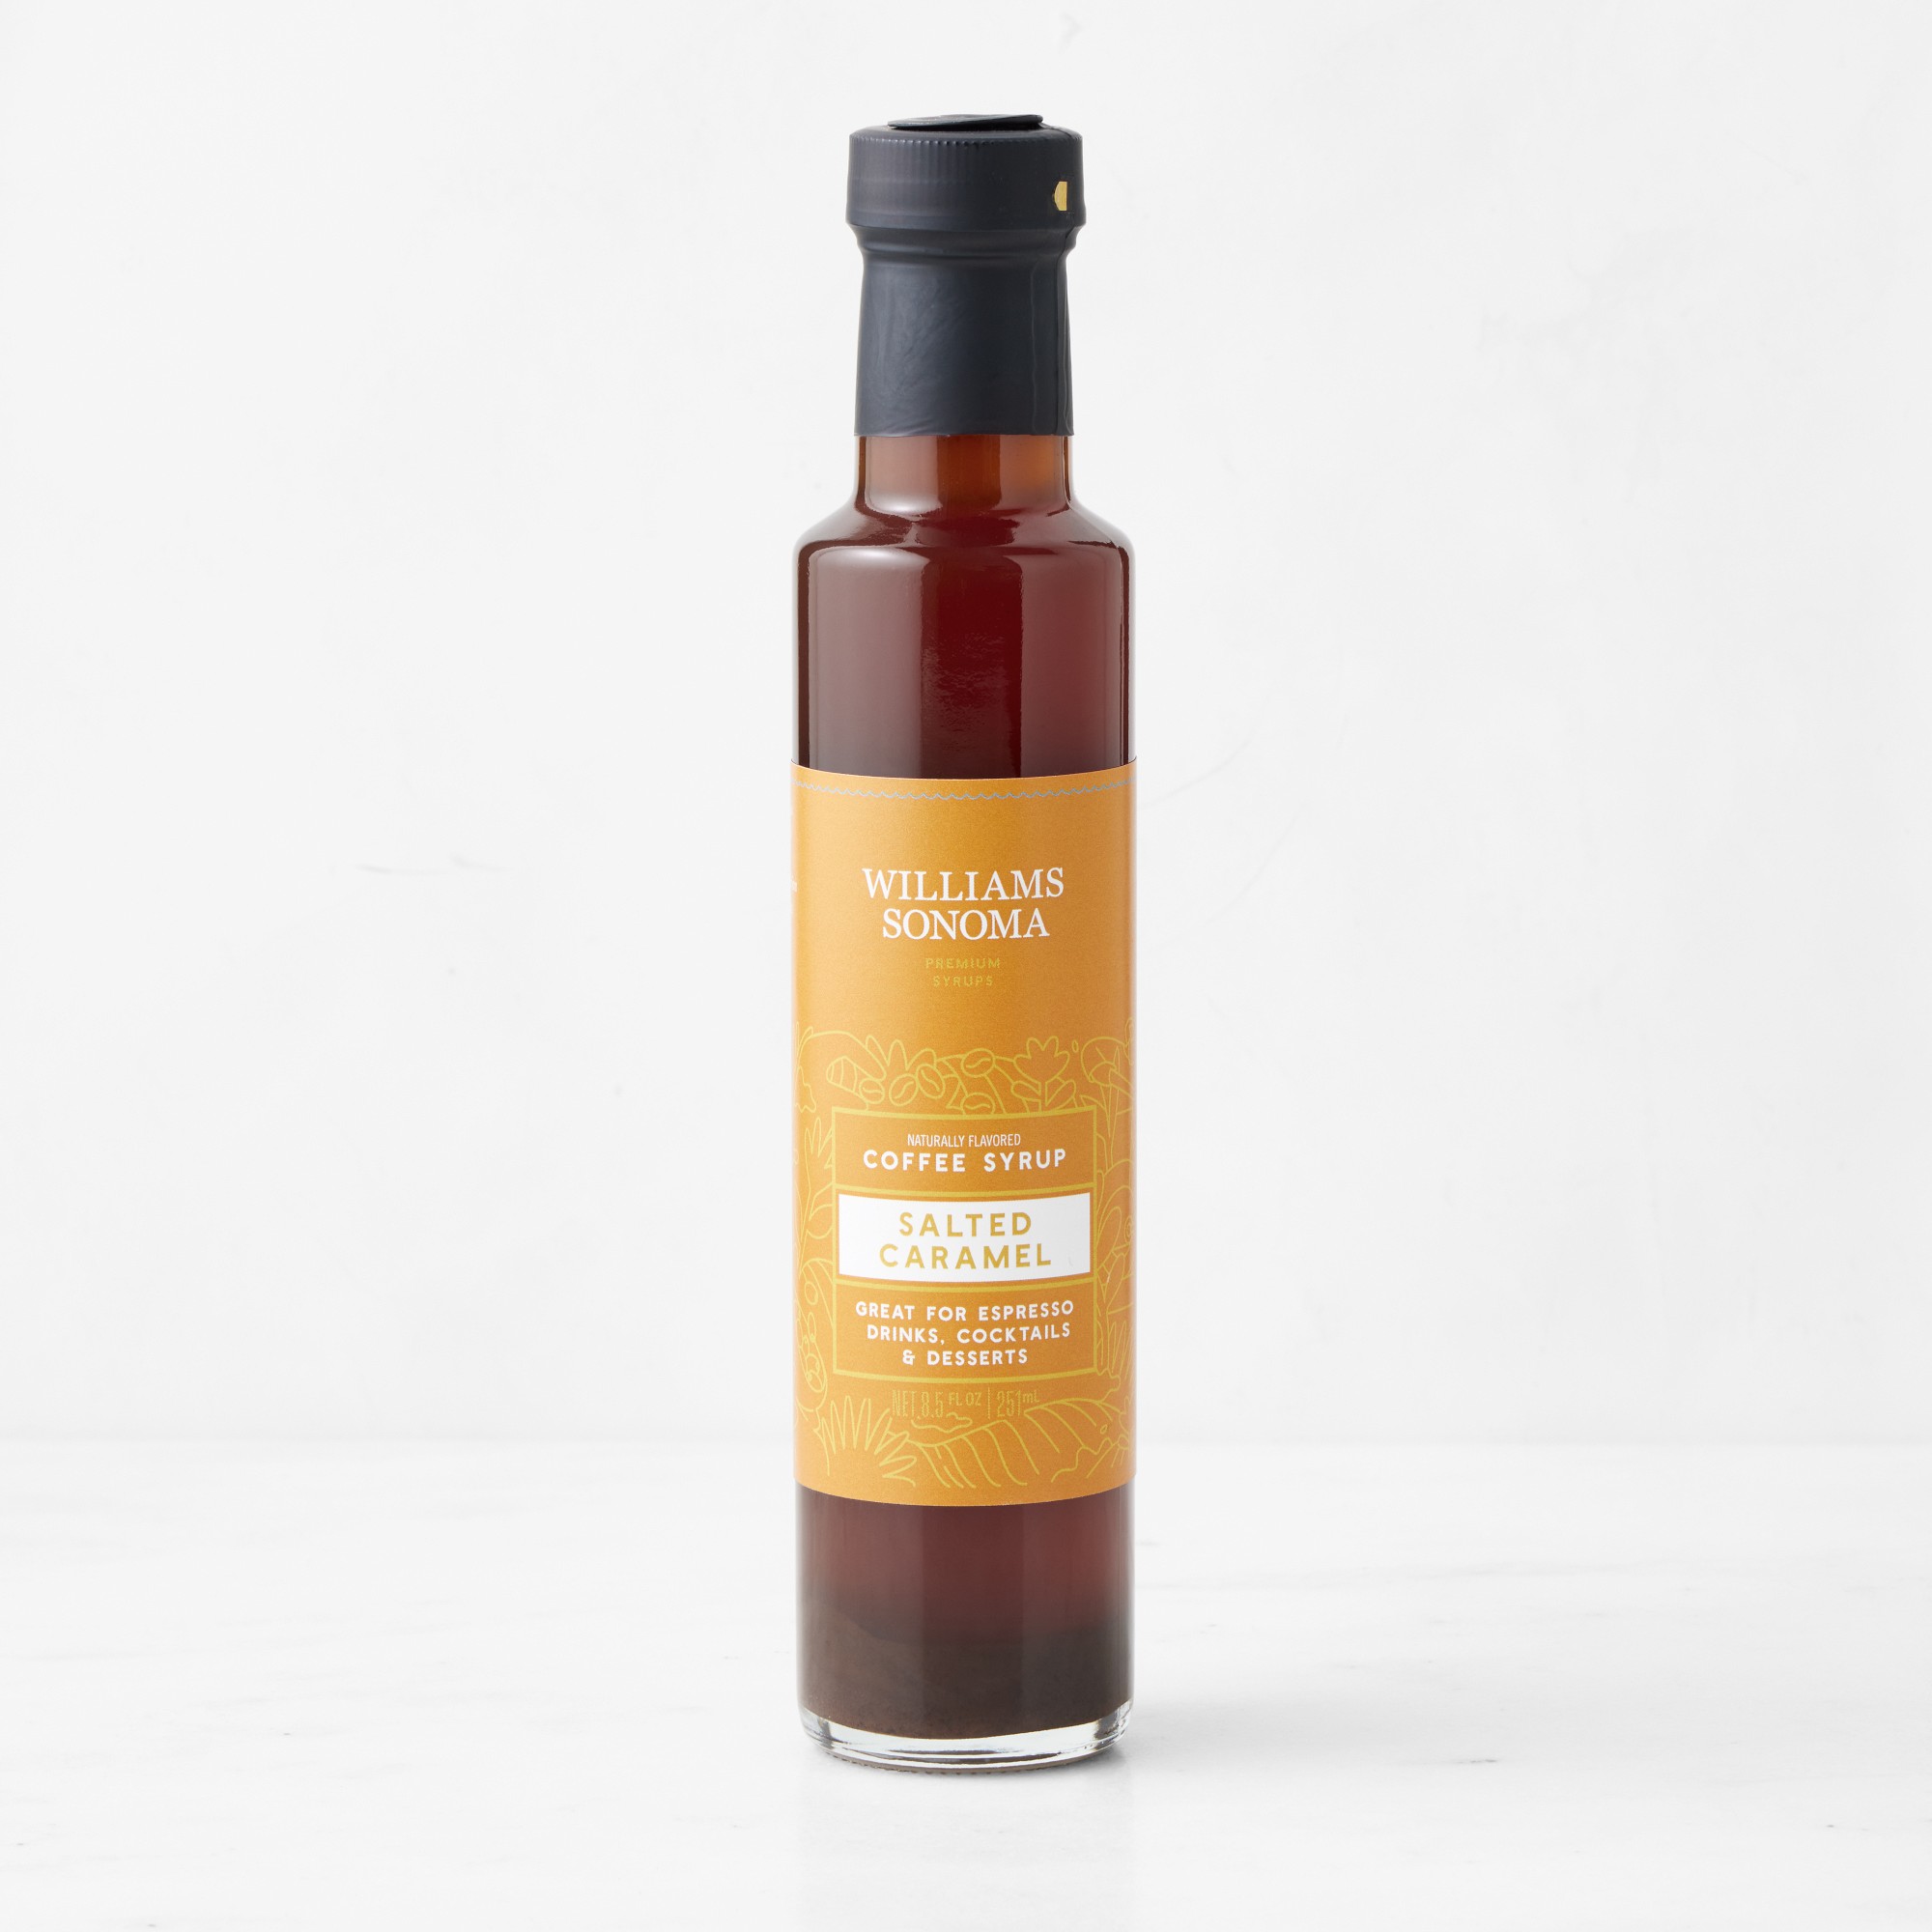 Williams Sonoma Coffee Syrup, Salted Caramel